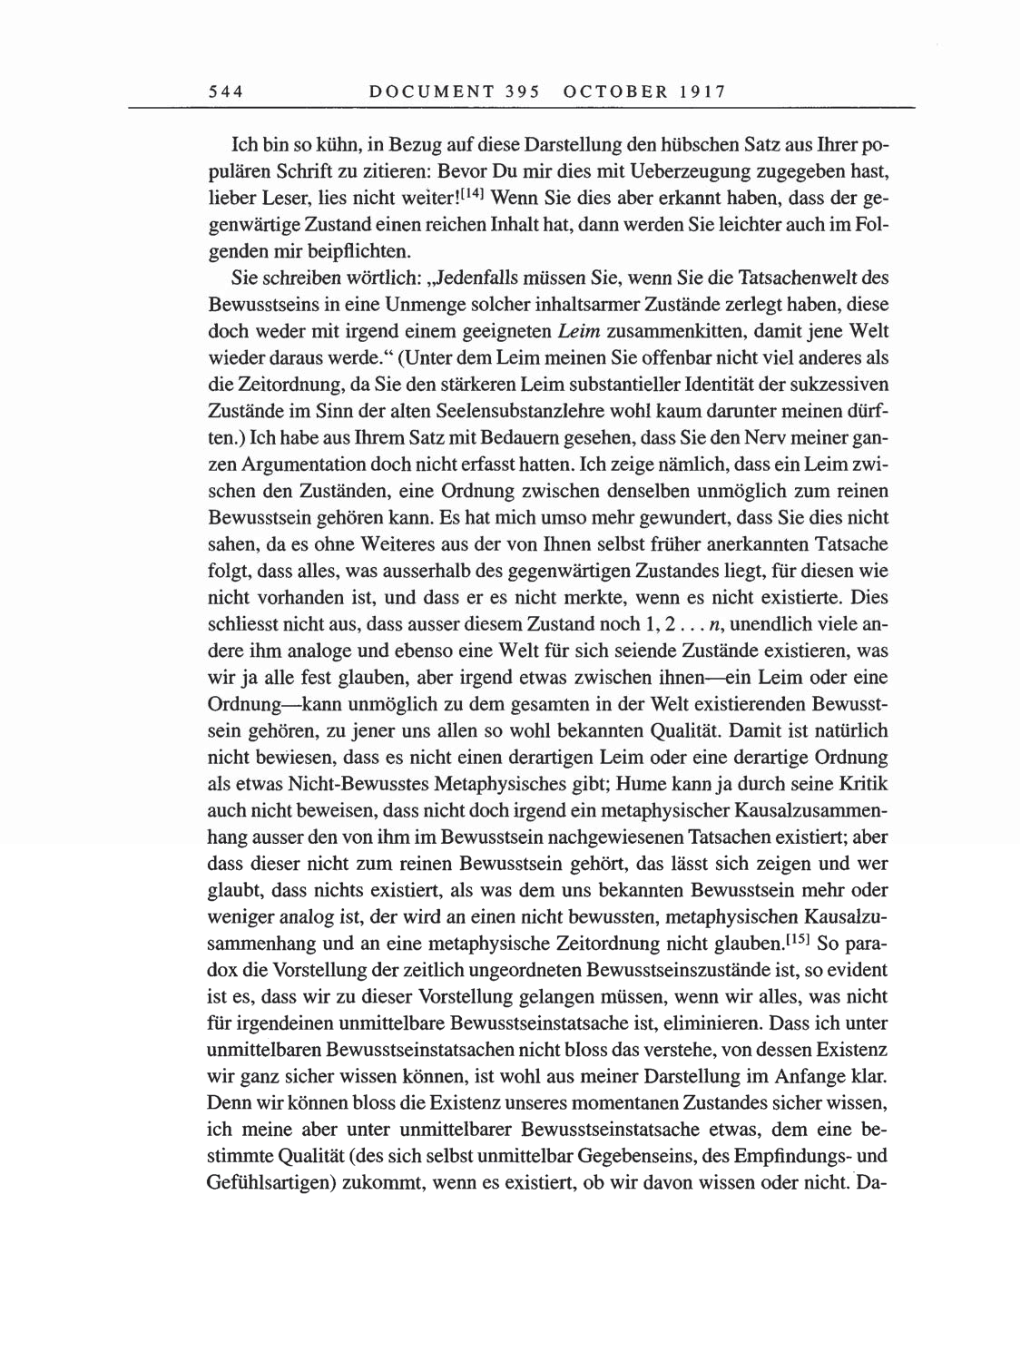 Volume 8, Part A: The Berlin Years: Correspondence 1914-1917 page 544